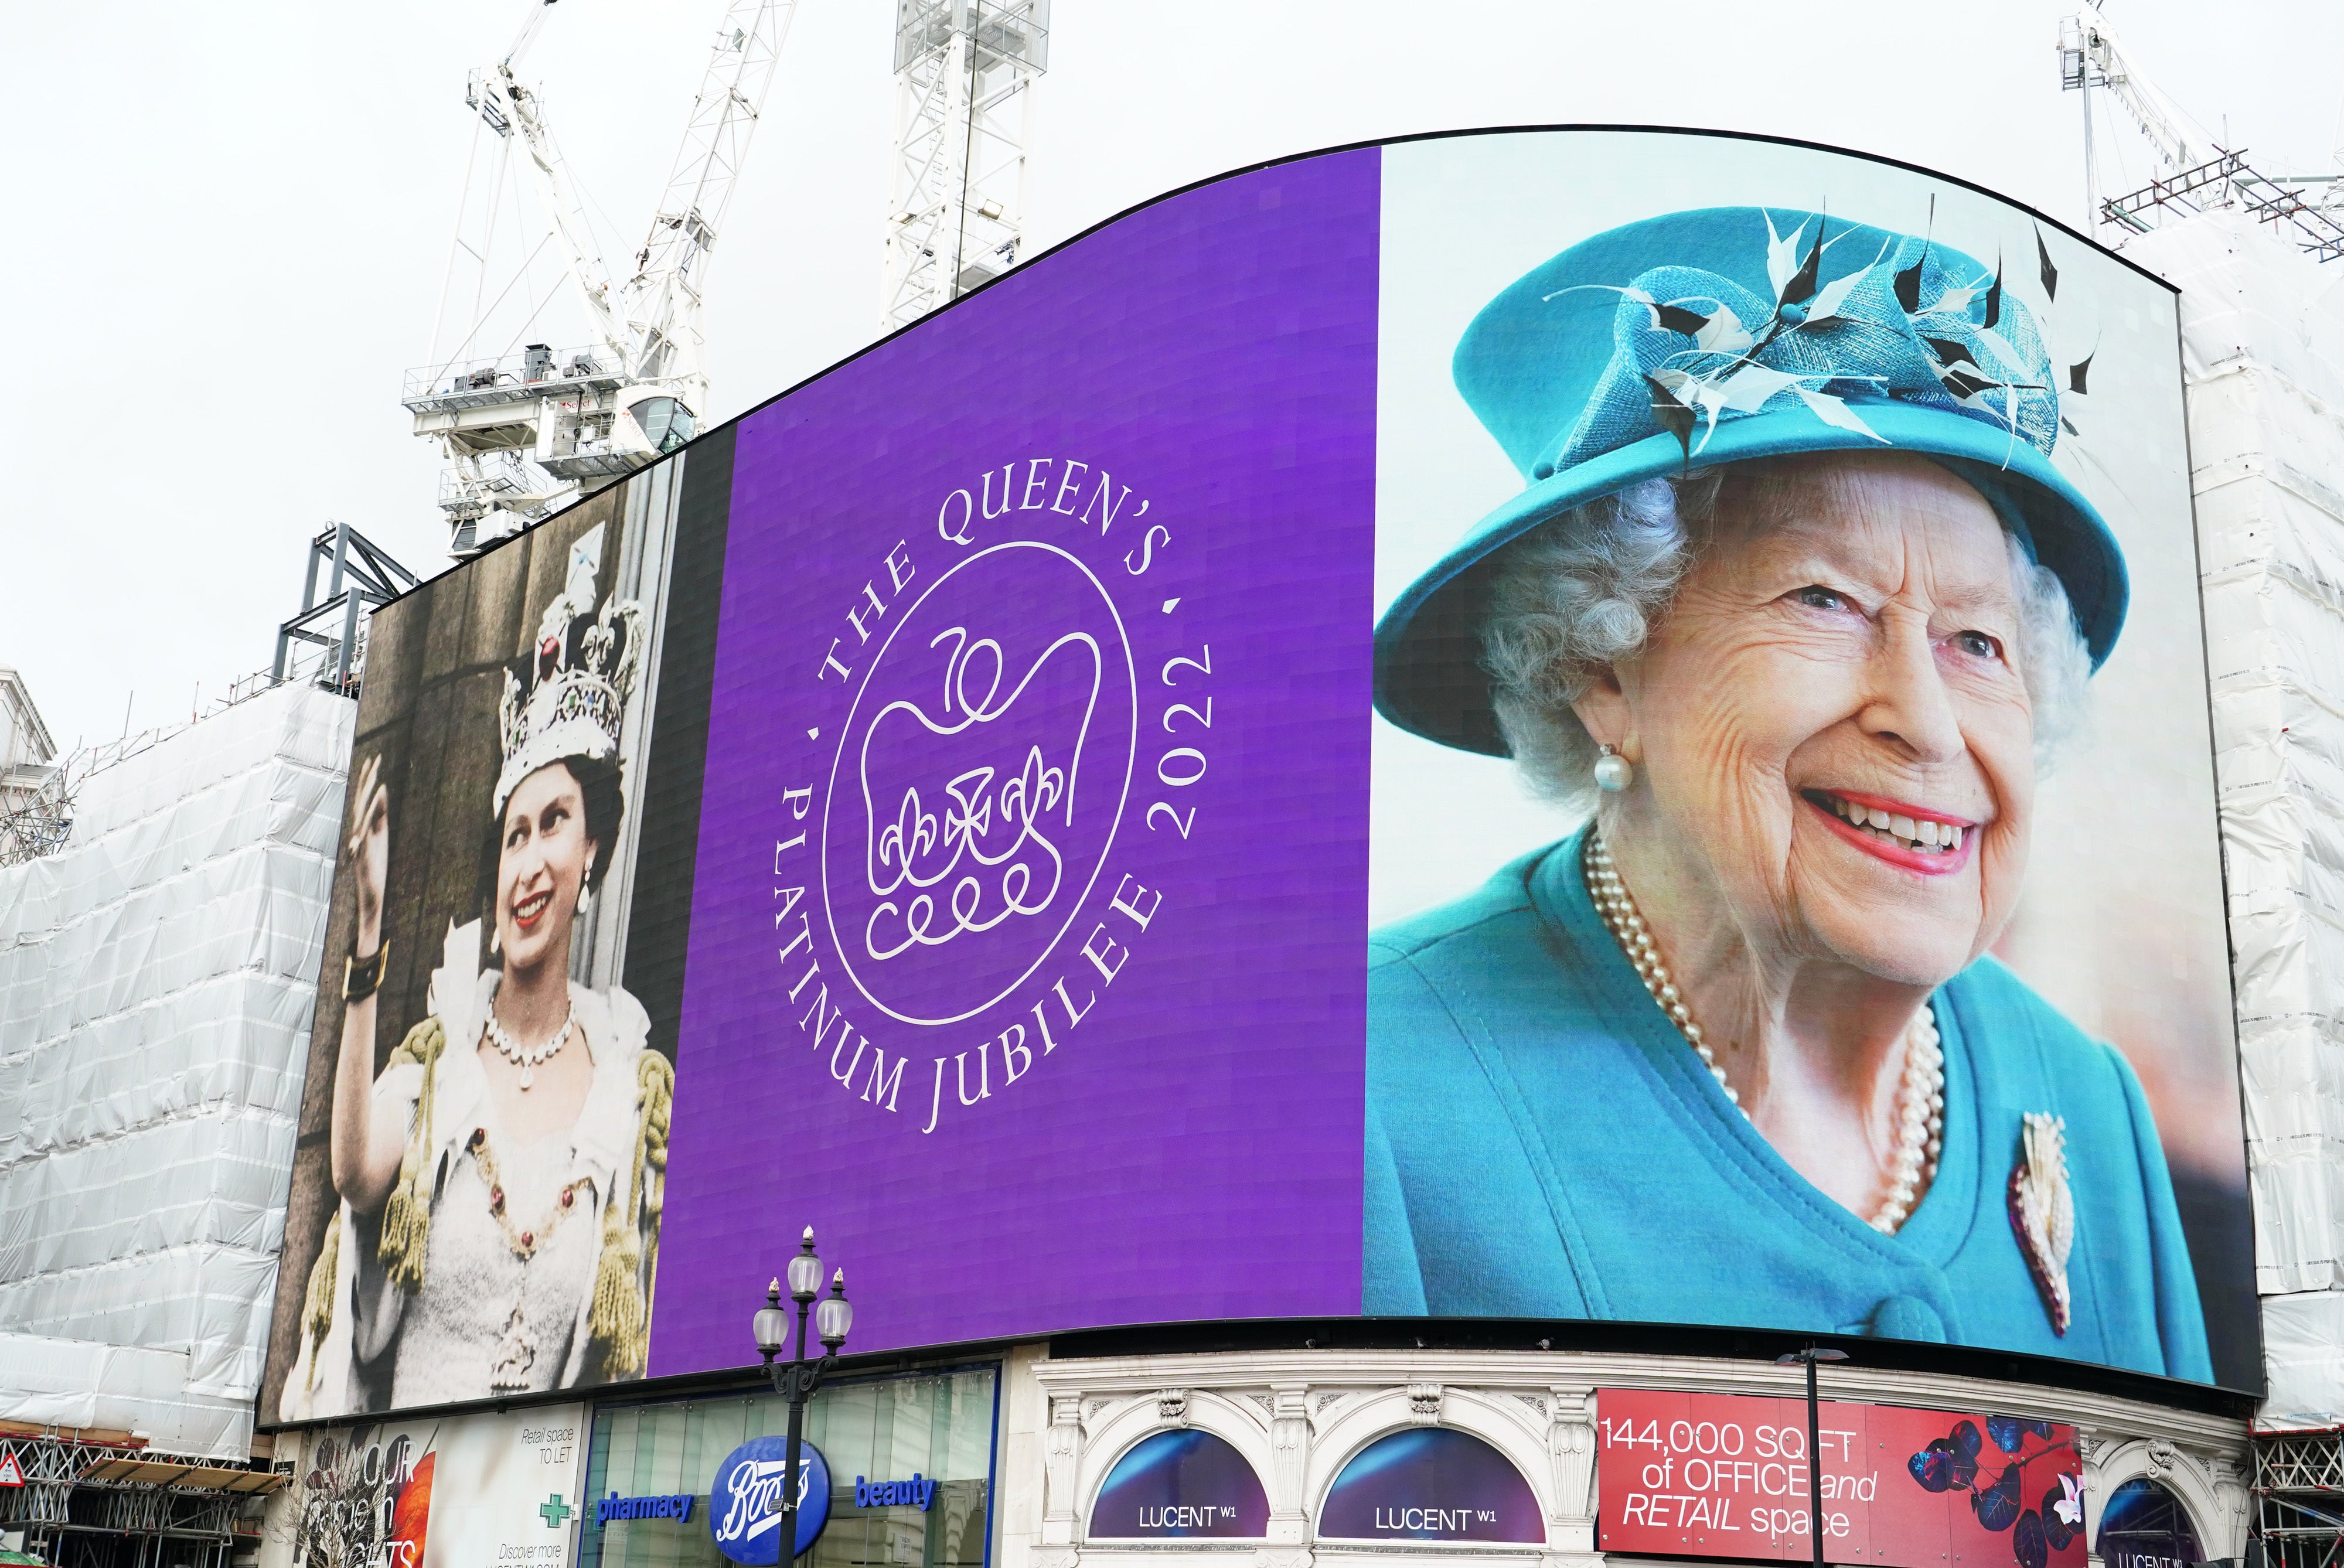 Platinum Jubilee images of the Queen at Piccadilly Circus